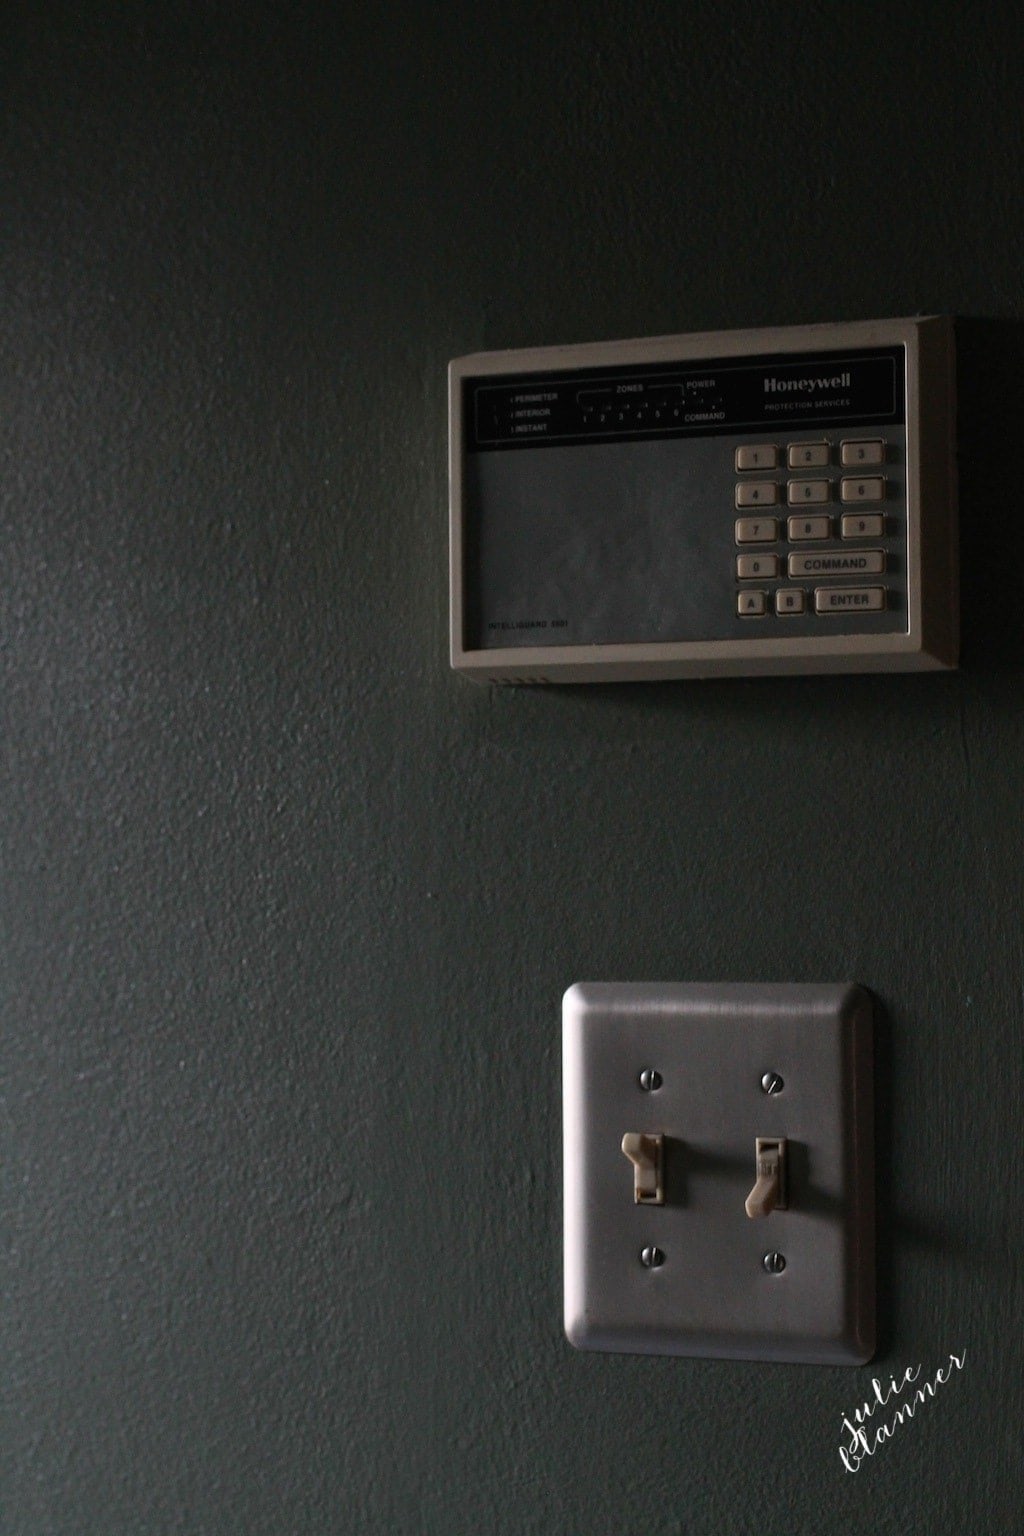 A black wall with a dated intercom system in an old home.